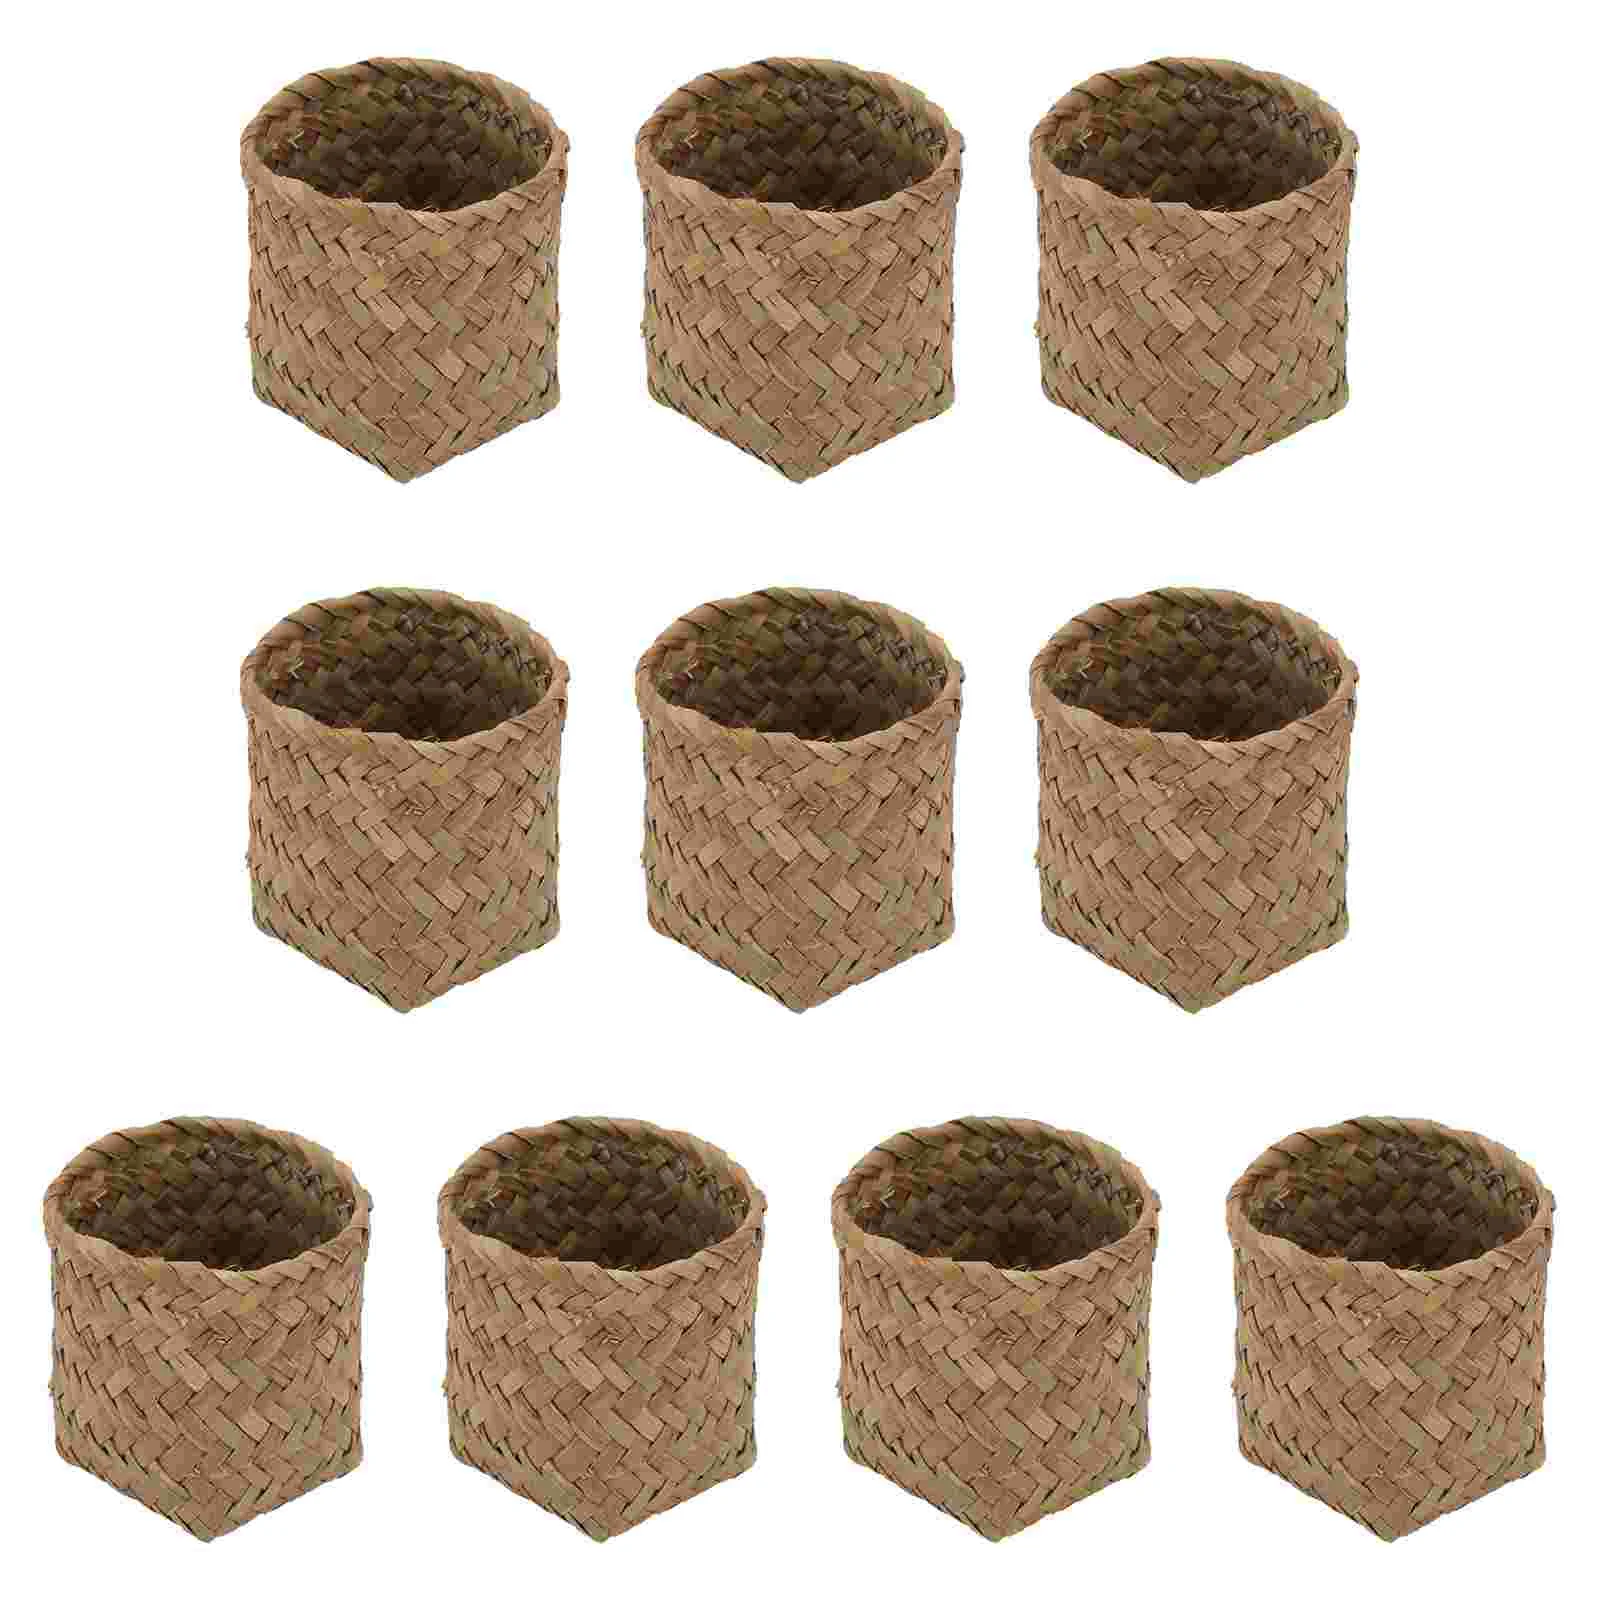 

Basket Mini Box Candy Baskets Wedding Woven Storage Boxes Case Gift Flower Rattan Holder Seagrass Party Wicker Chocolate